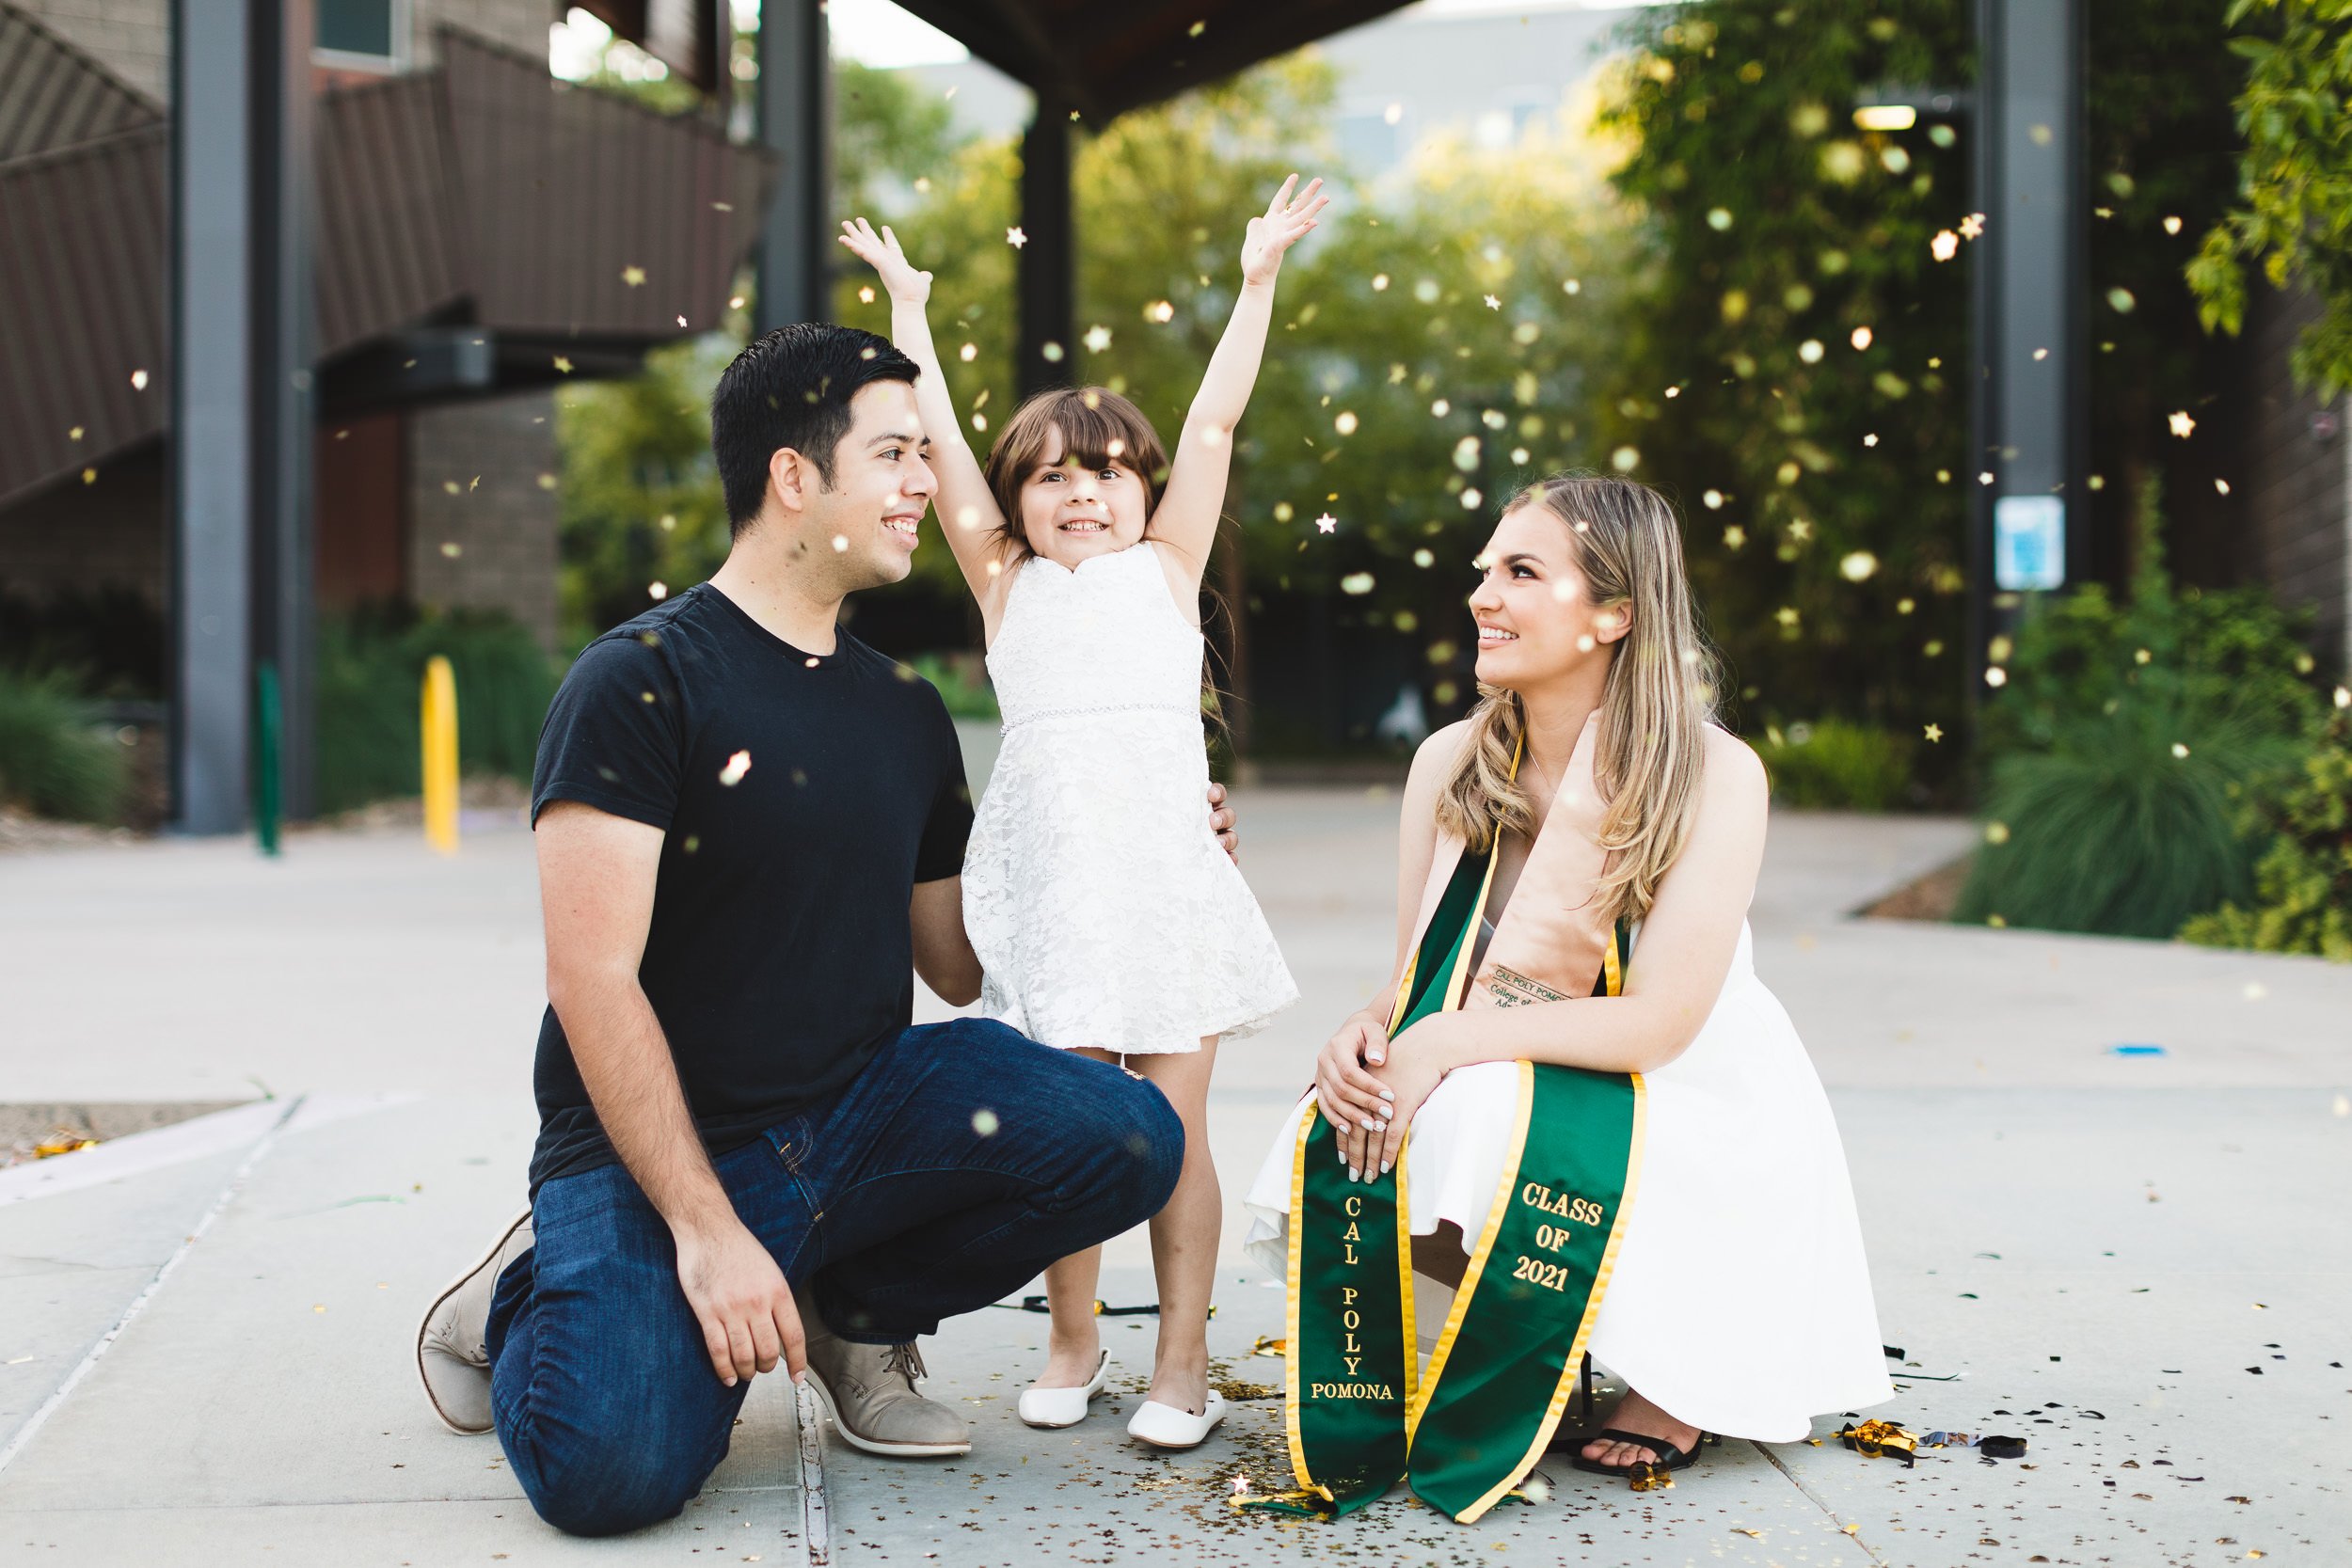 Graduation portraits for moms, kids, and whole family, confetti throwing in the air. Pasadena, CA.